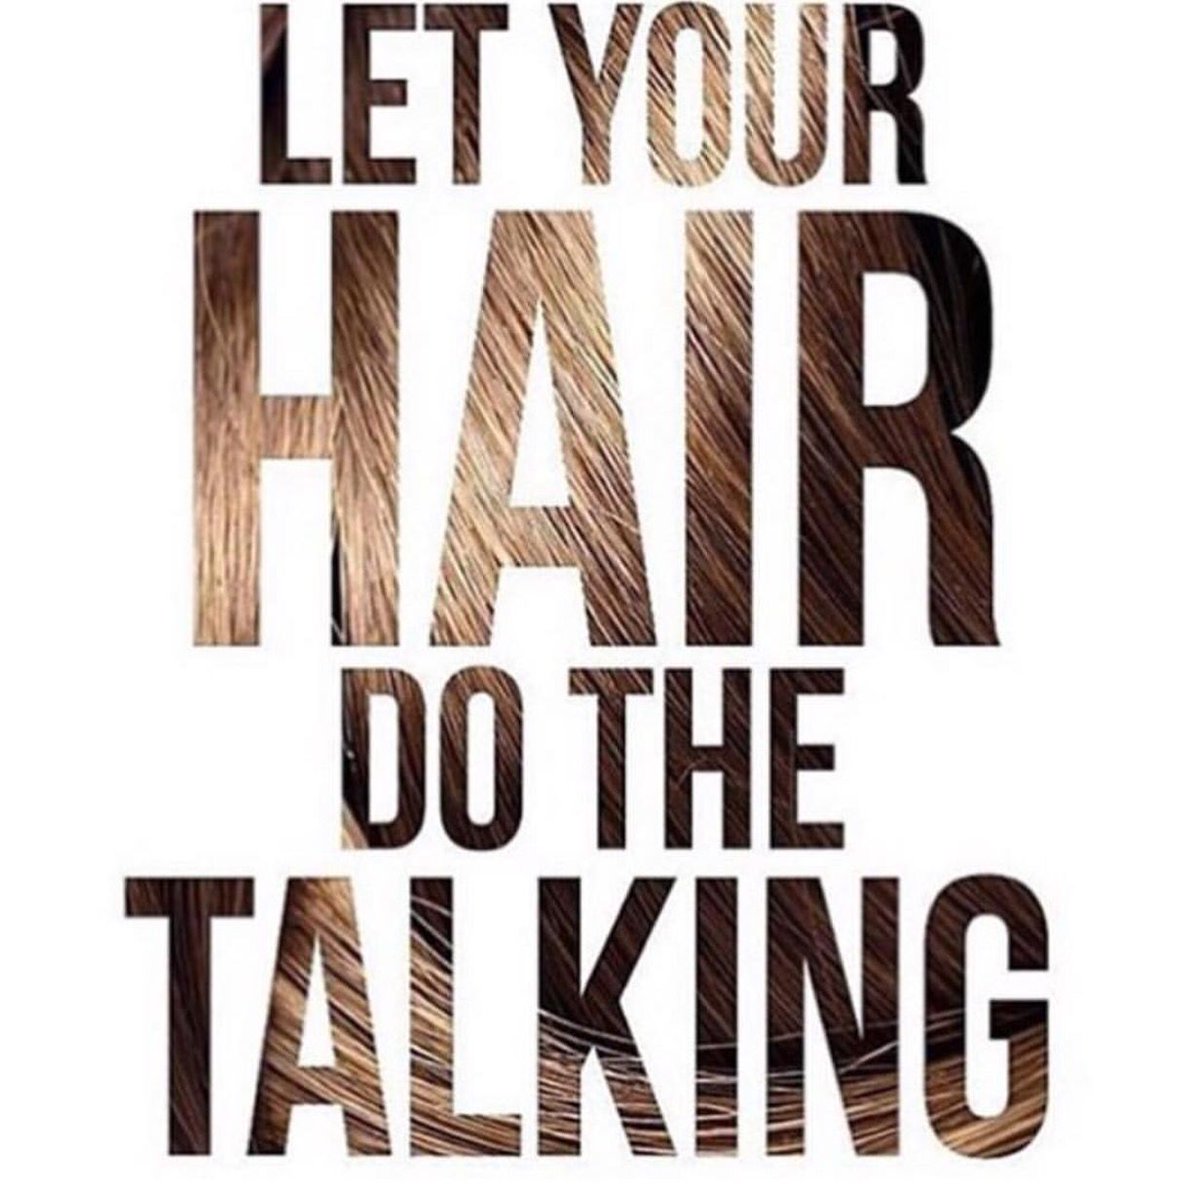 Together, we'll take your look to new lengths. #HairLossSpecialist #HairLossAugustaGA #MedicalWigs #HairCareSpecialist #HealthyHairCare #HBTChair #HairAndScience #TrichologySpecialist #HairProfessional #HolisticHairCare #HairGoals #SelfCare #Beauty #CancerSupporter